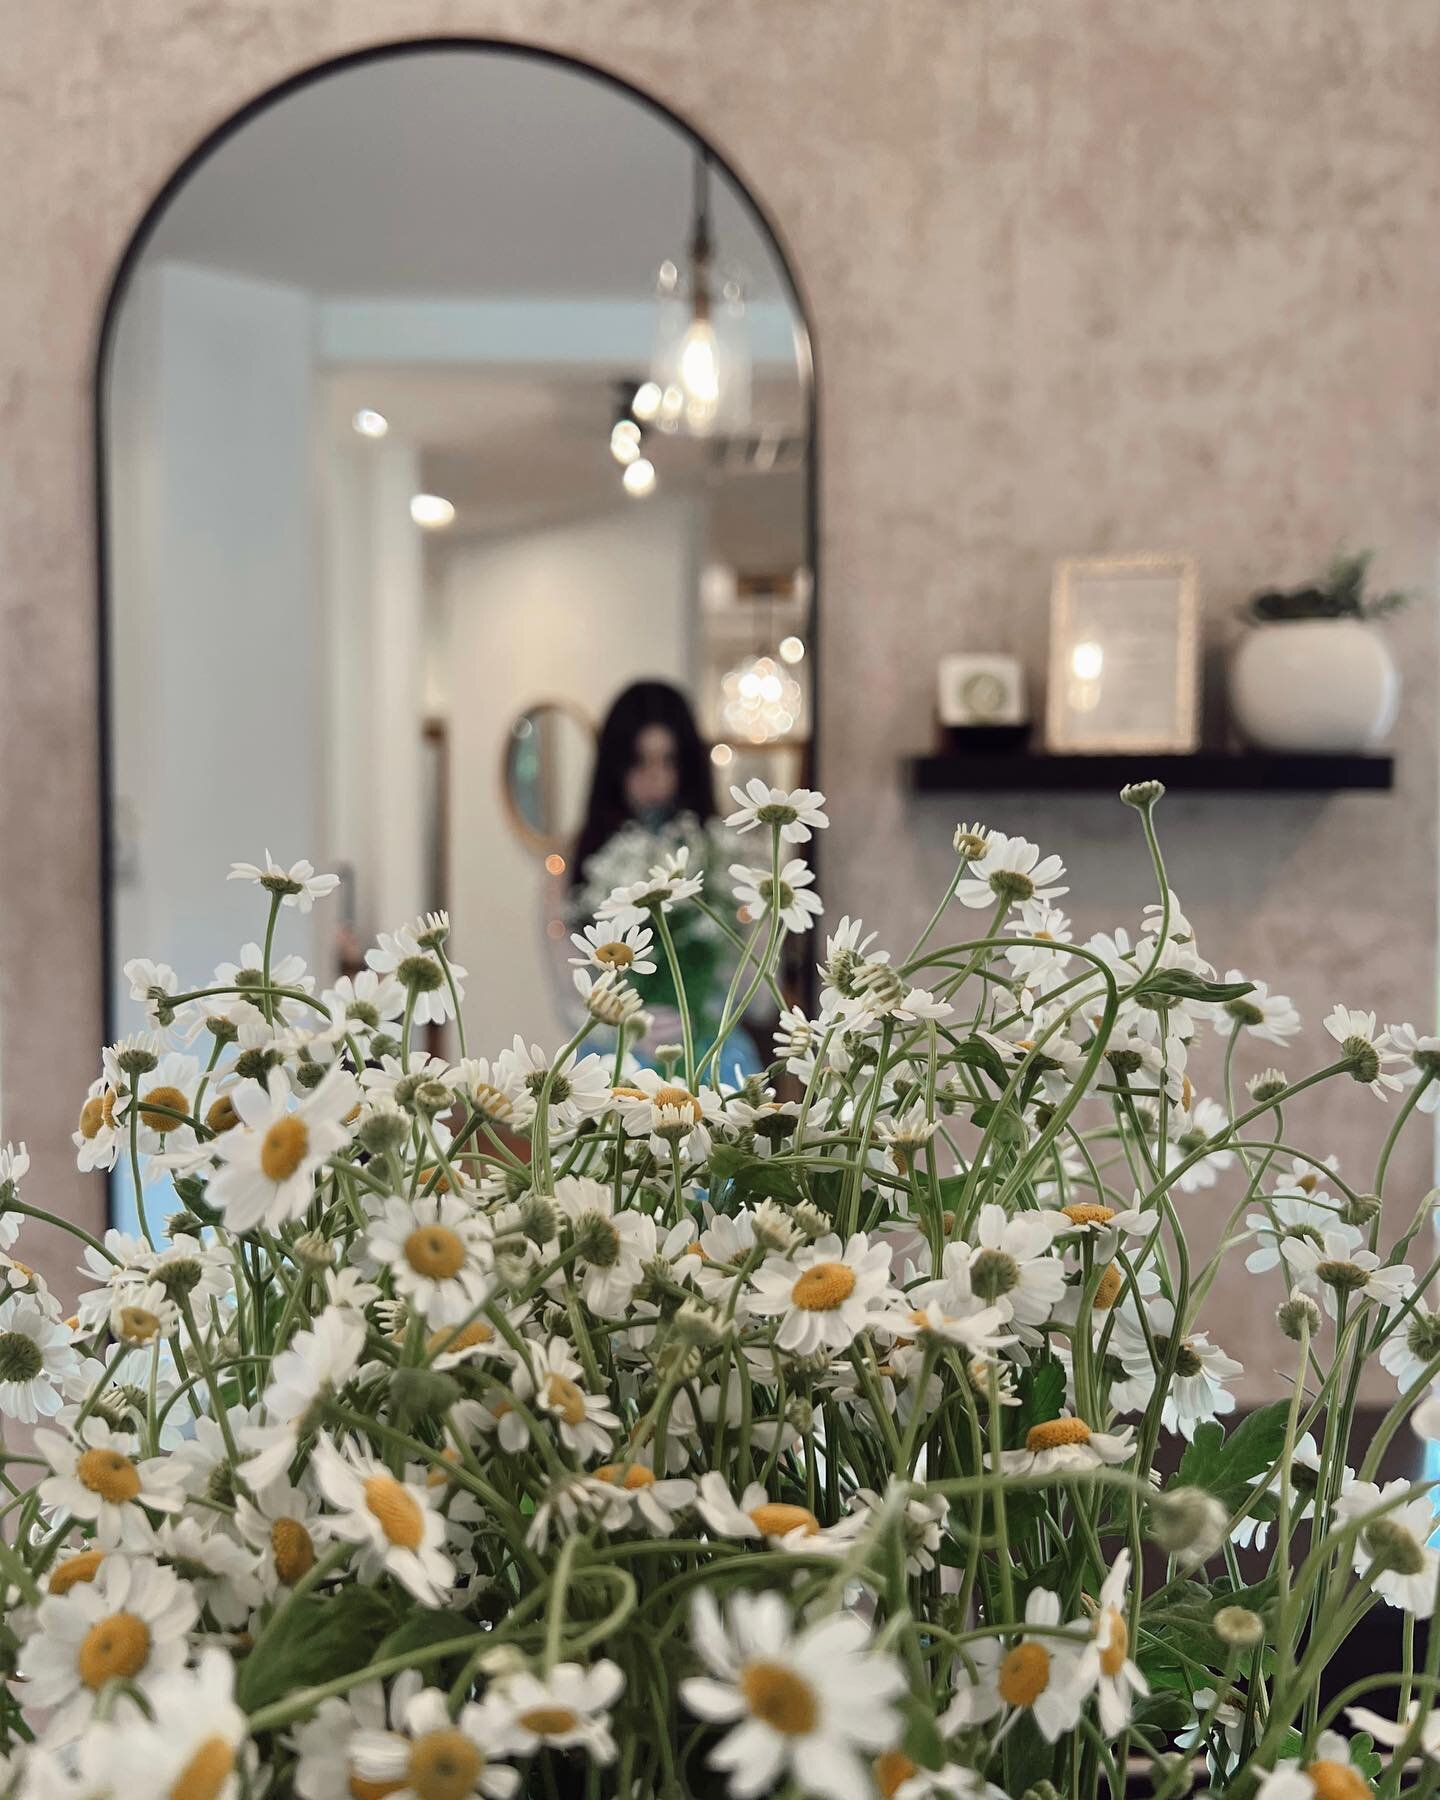 who doesn&rsquo;t love fresh flowers on a spring day?

are your spring services scheduled? get on the books via the link in our bio or by calling the salon.

P.S. we have openings this week. 👀

#issaquah #issaquahblondespecialist #issaquahhighlands 